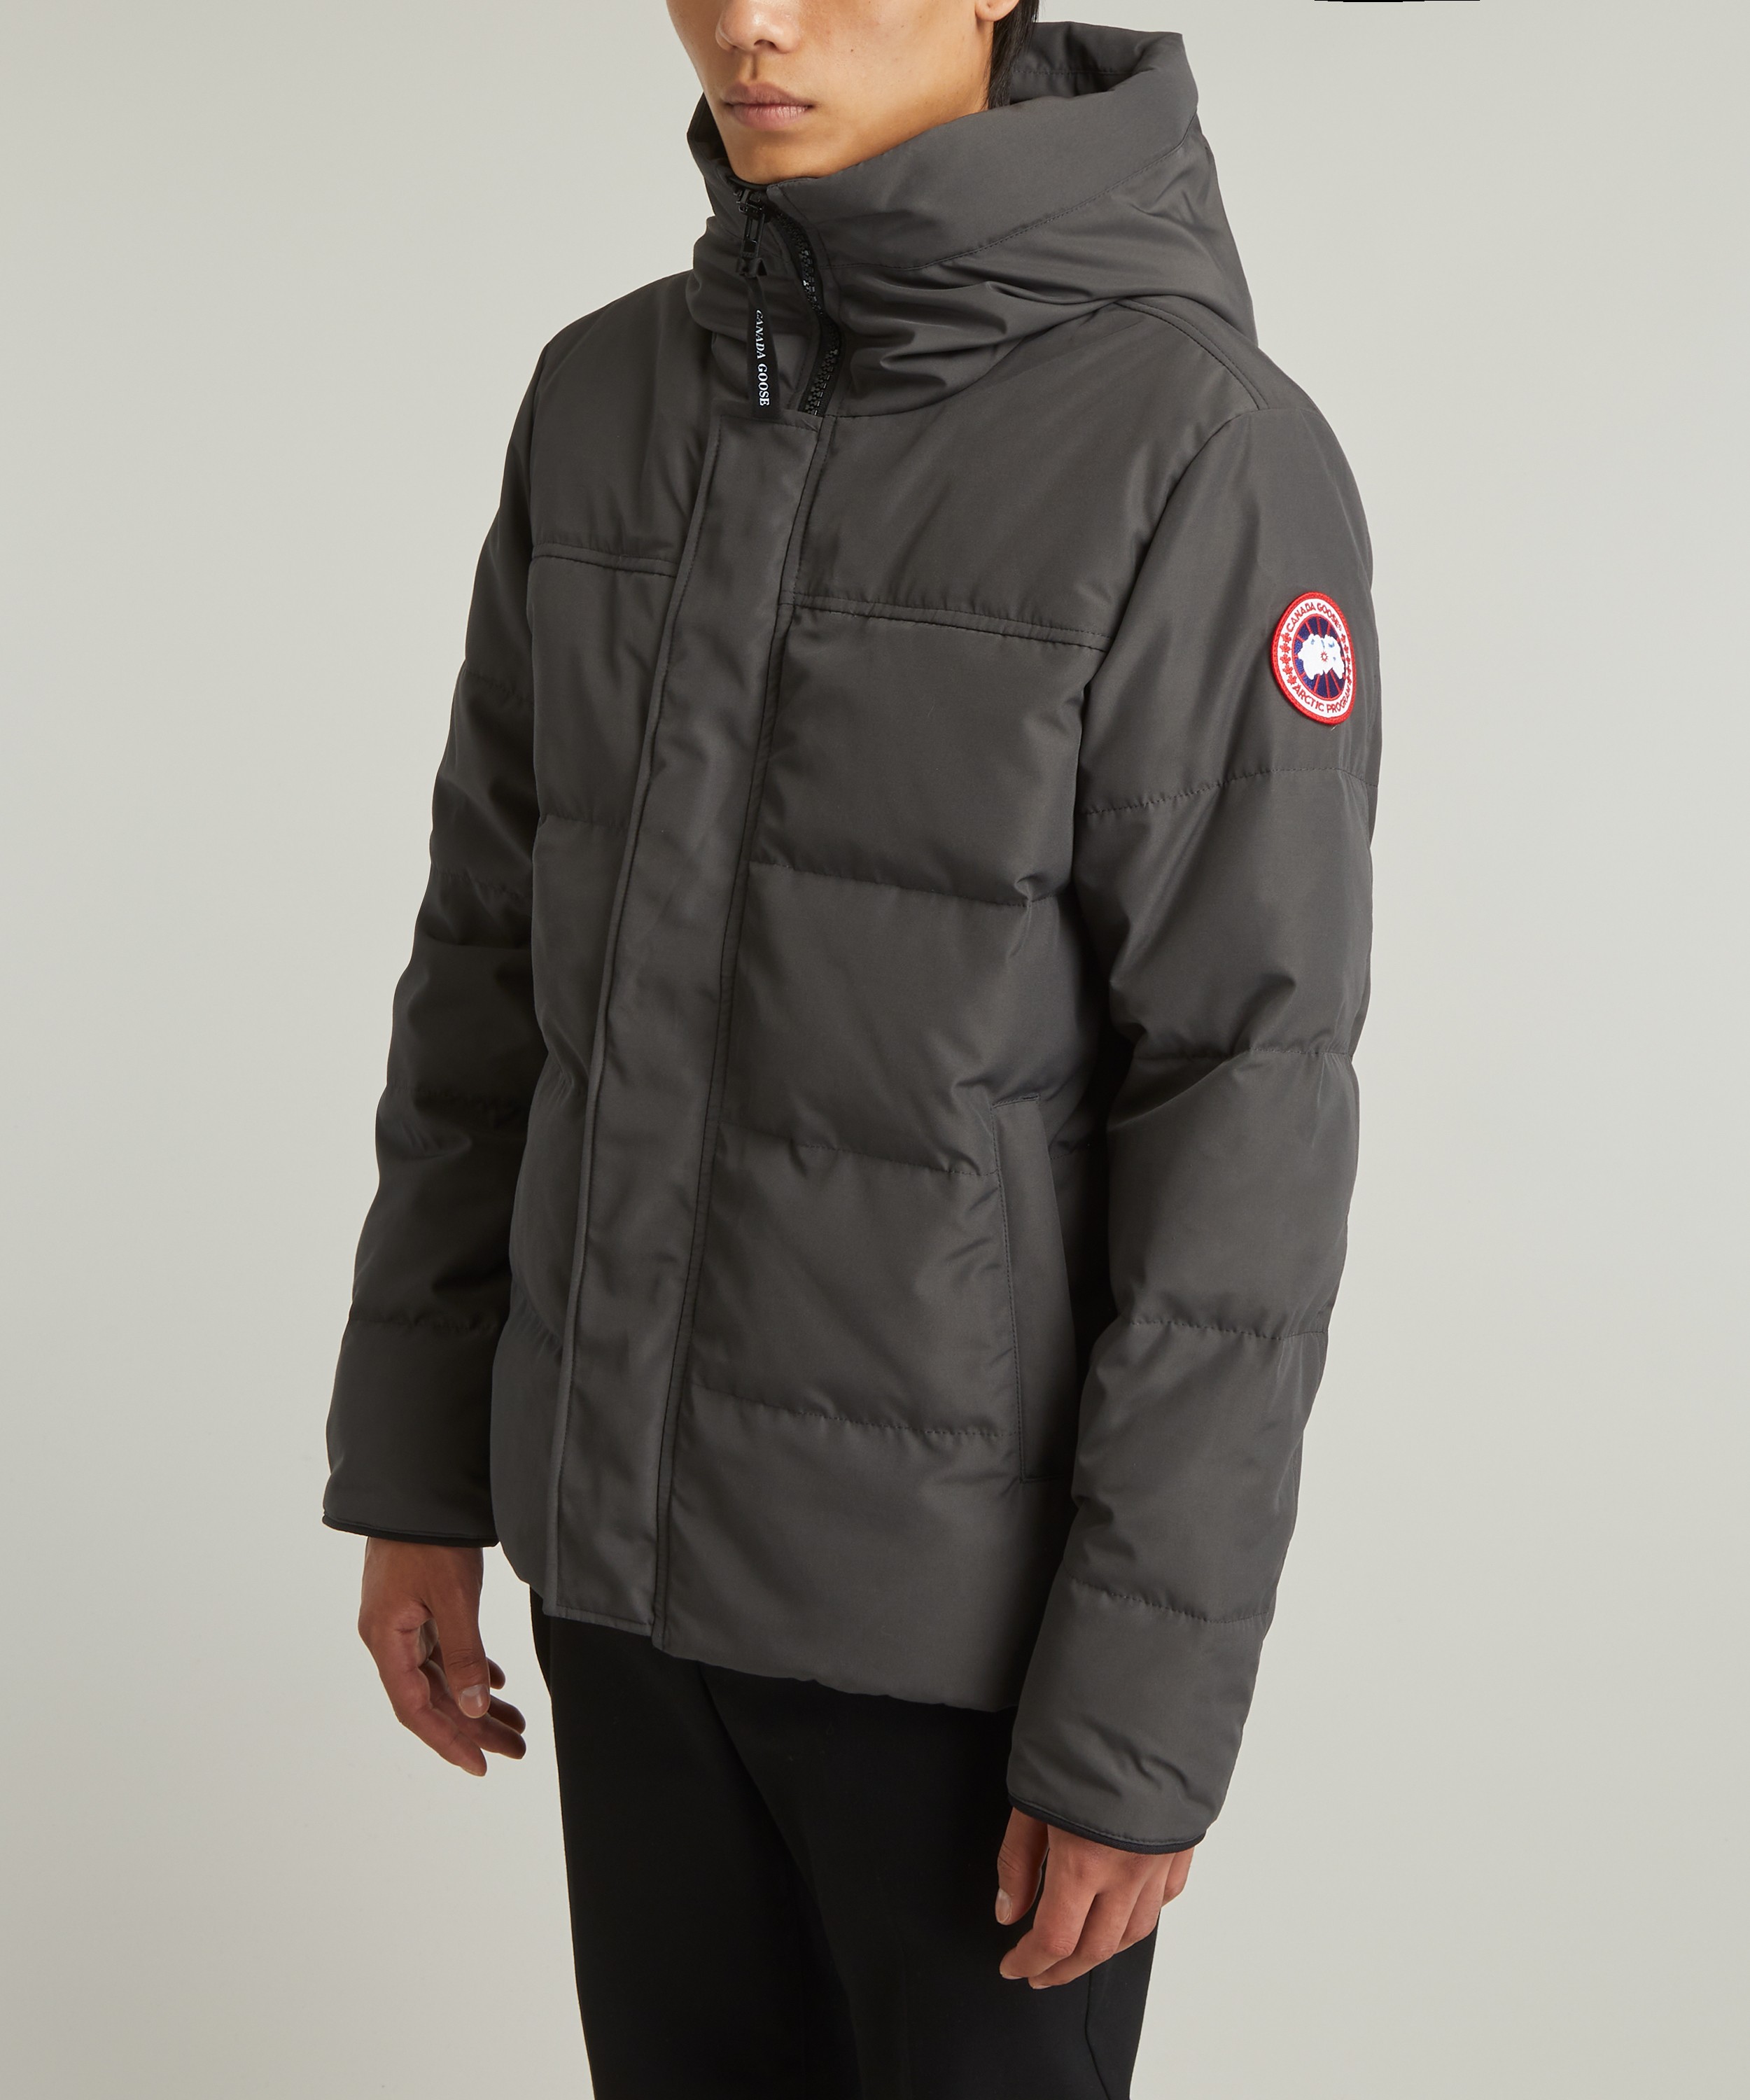 Canada Goose for Men SS24 Collection